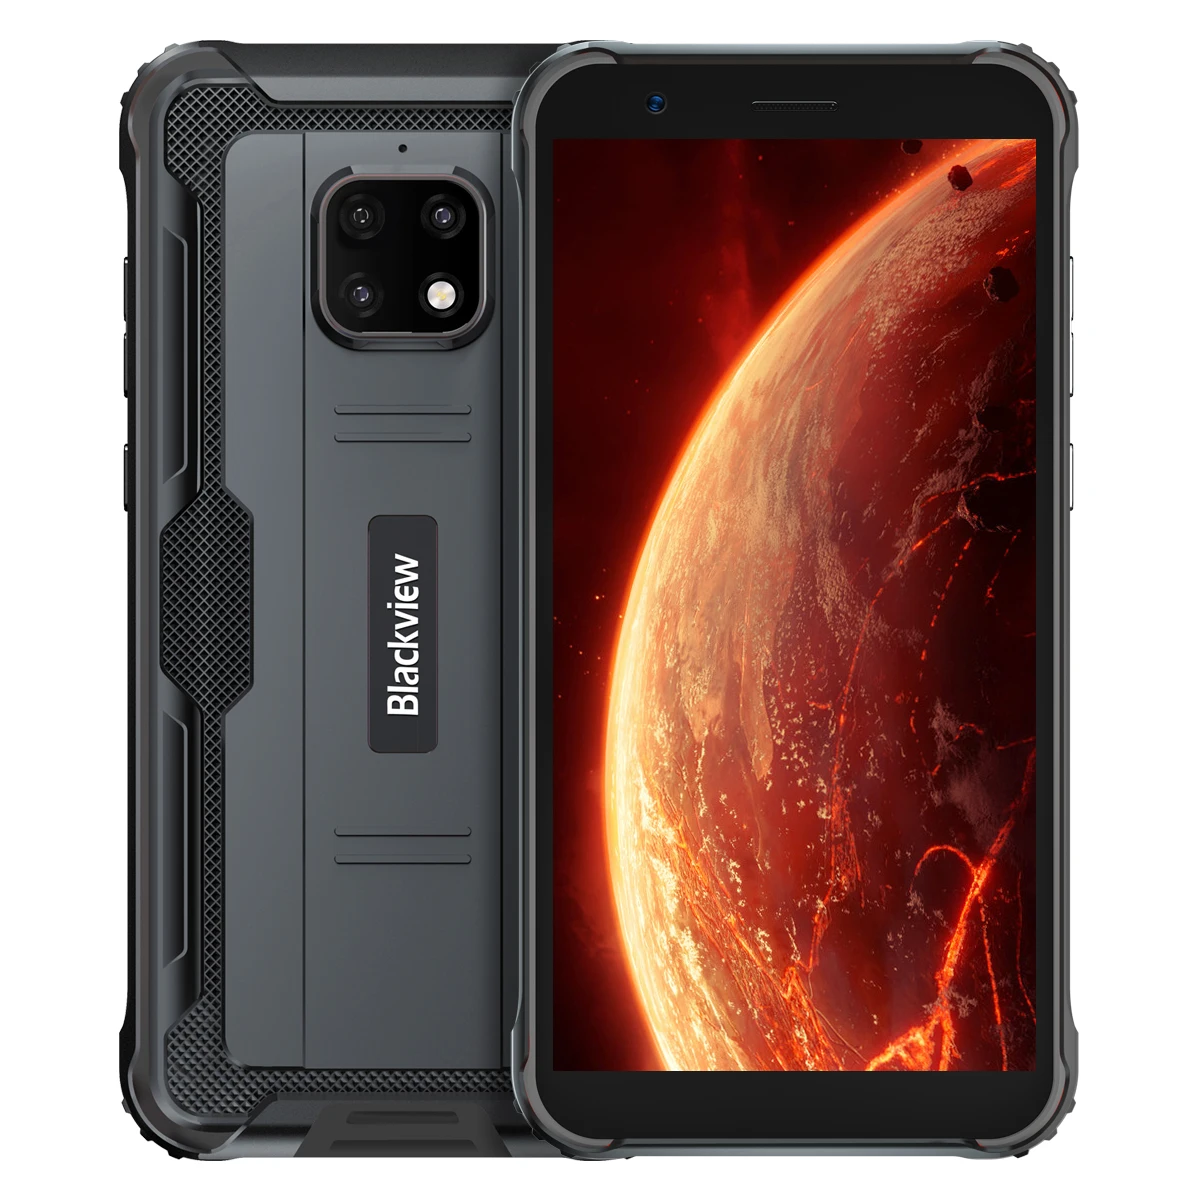 

Hot Sell mobile phone Blackview BV4900 5580mAh Rugged Cellular Waterproof 5.7inch Android 10 smartphone 3GB+32GB Dual Camera 5